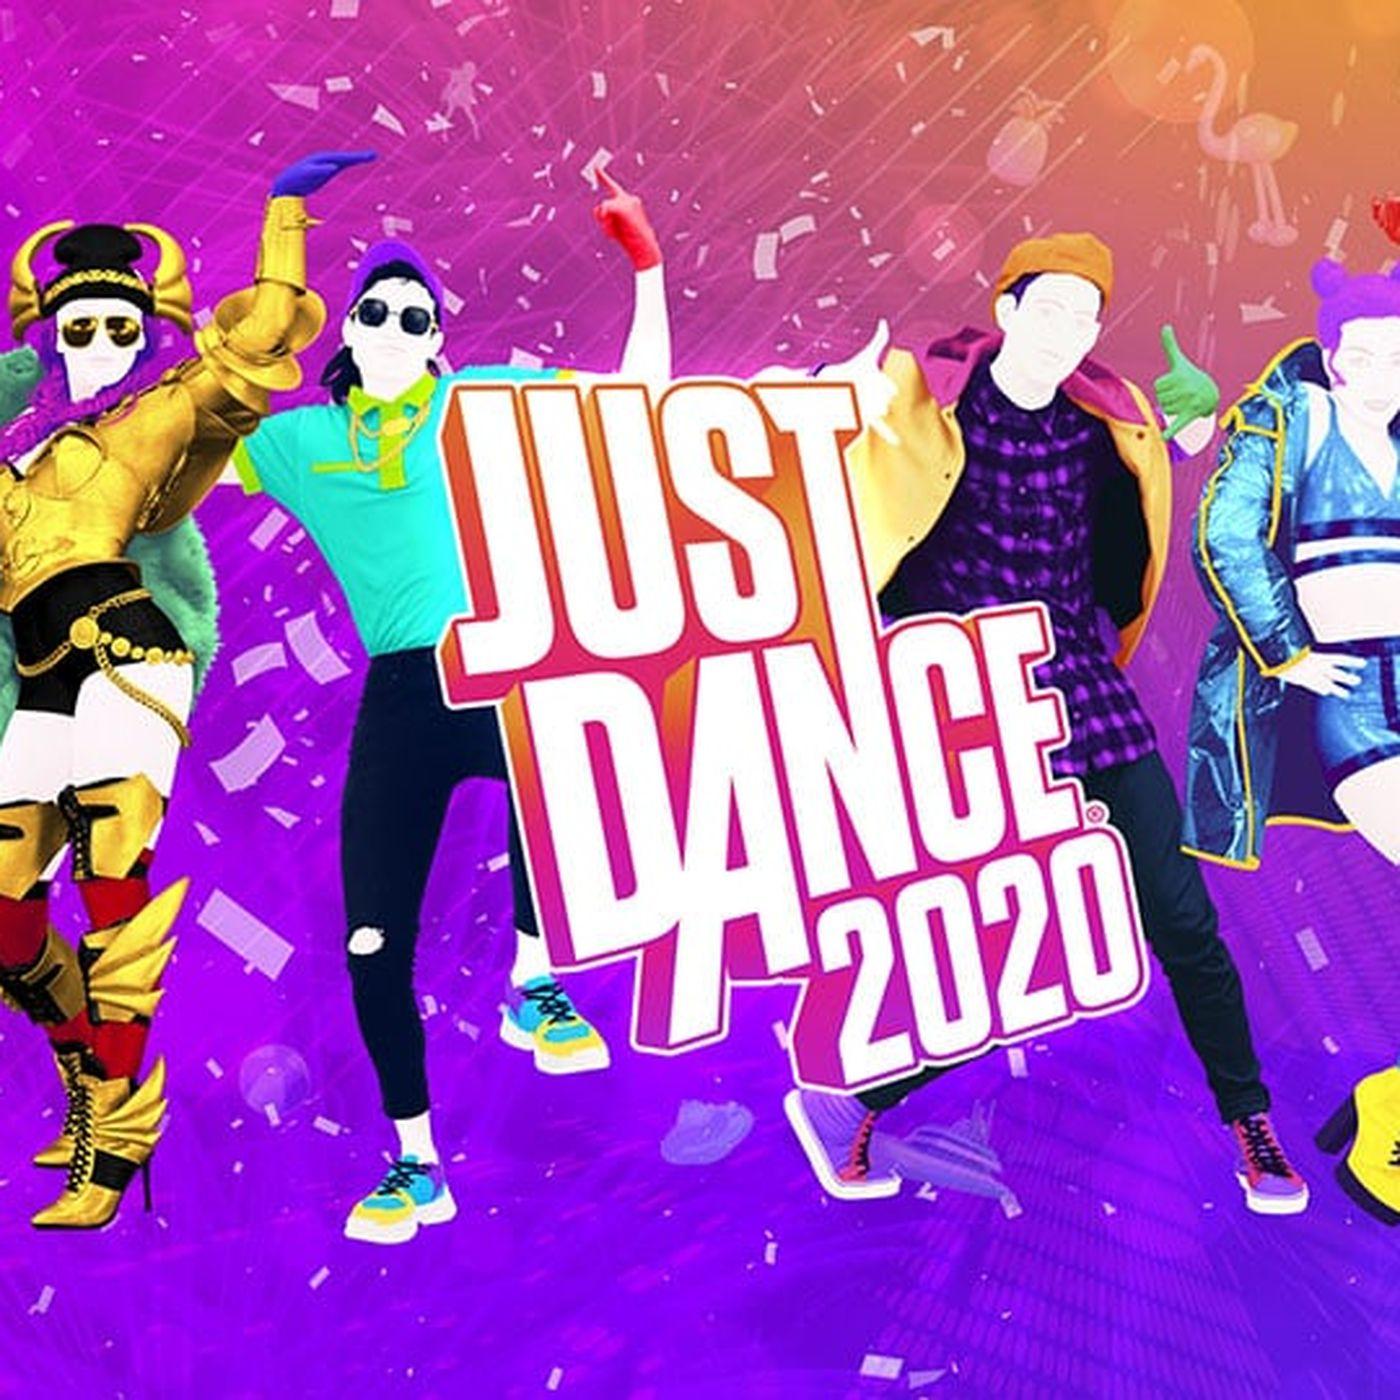 Just Dance 2020 is not coming to Wii because of its use